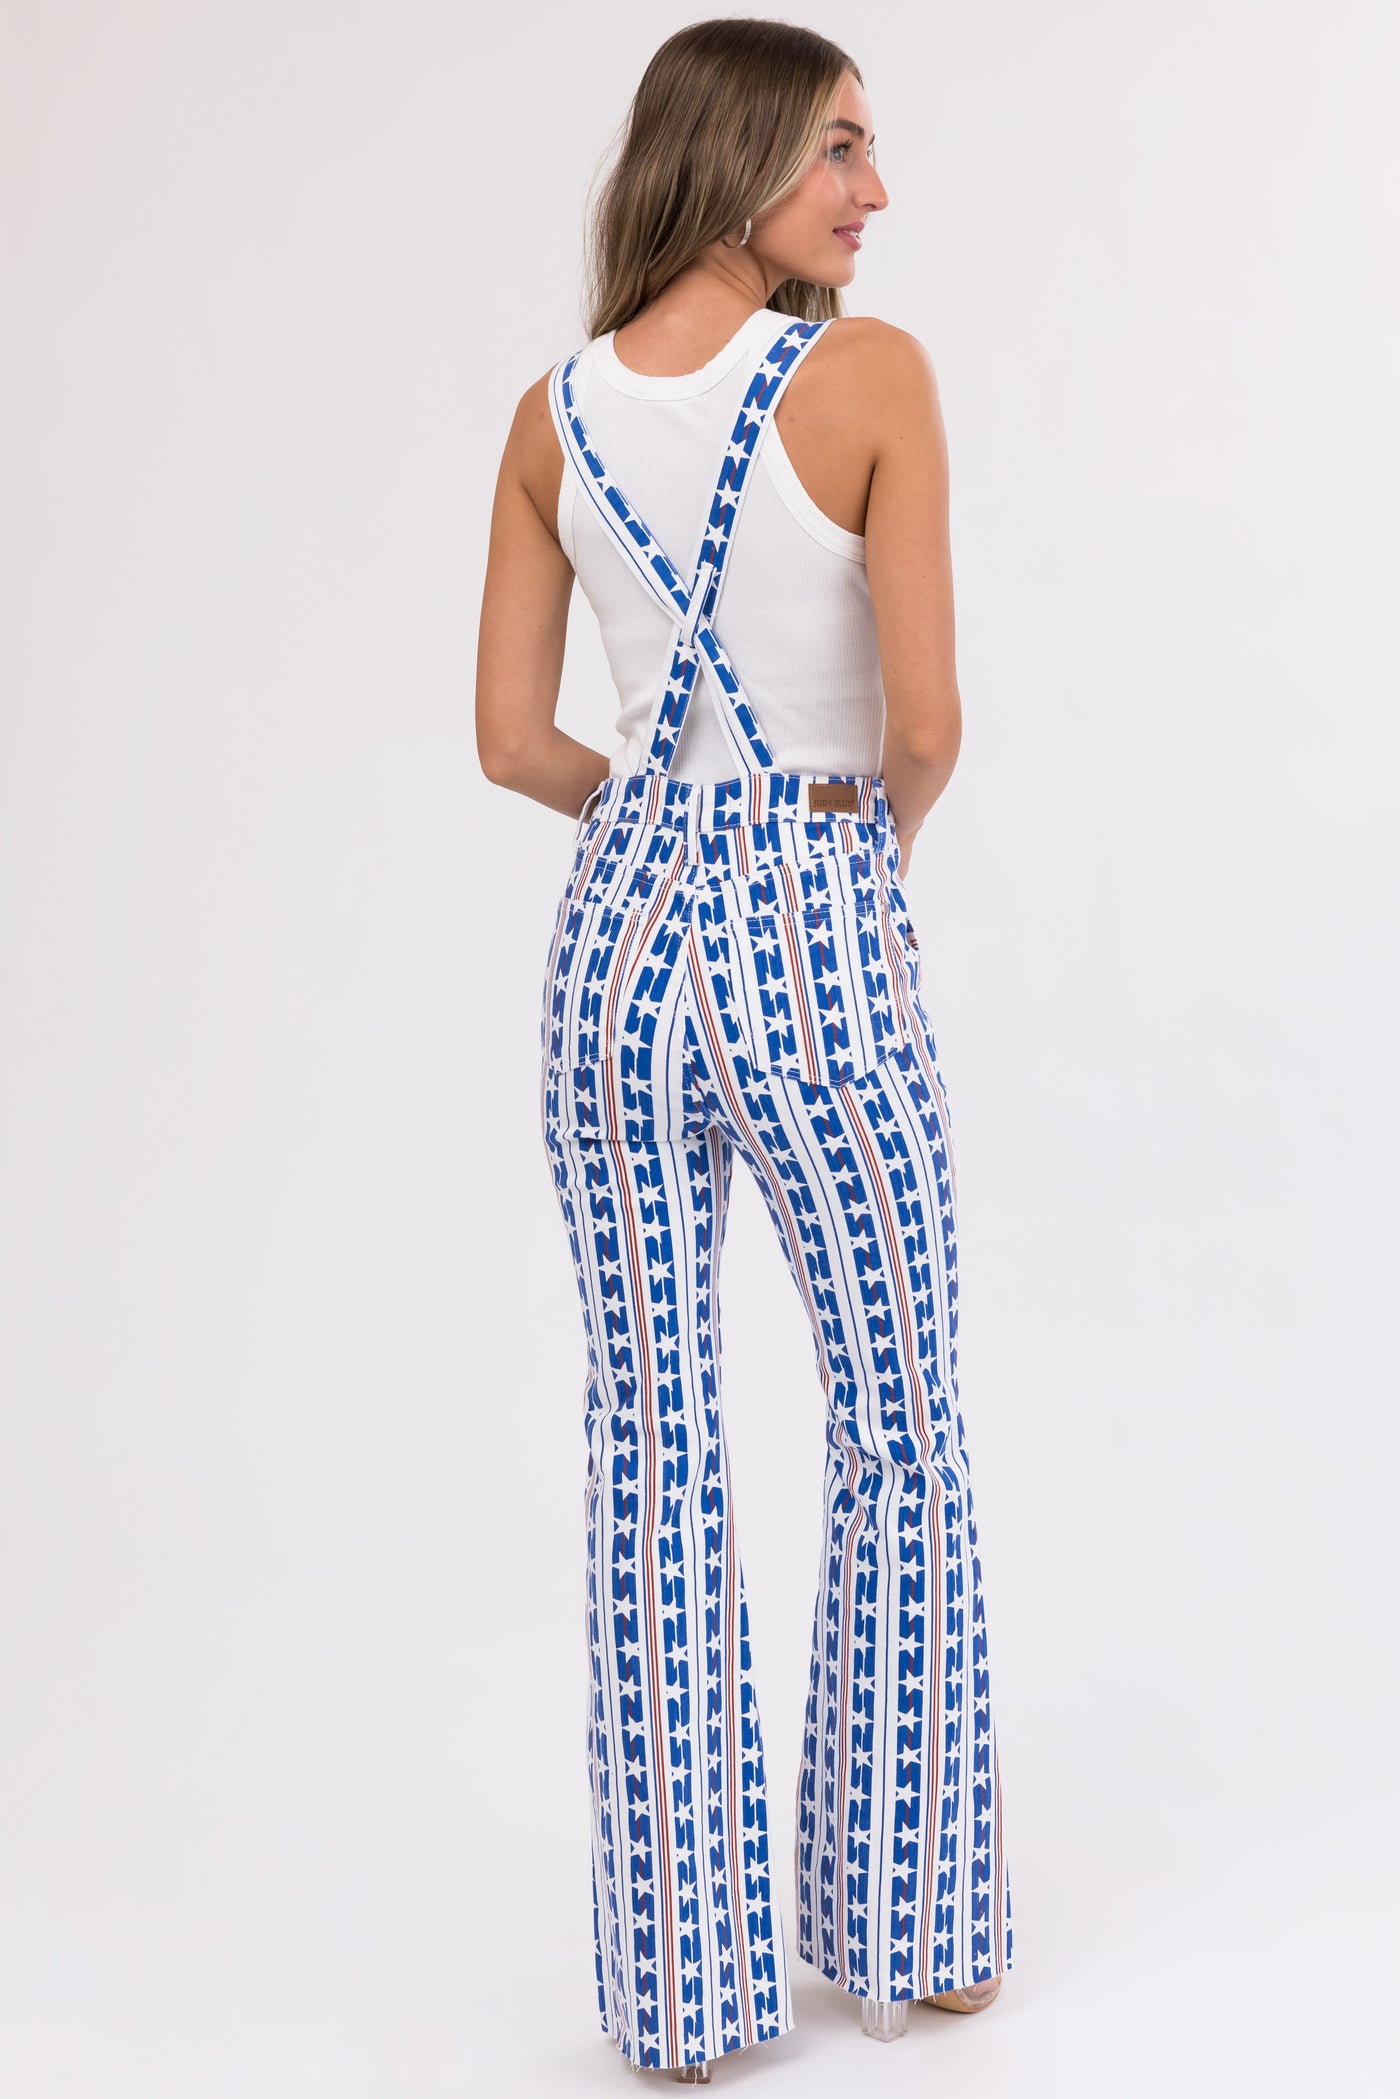 Judy Blue Off White American Print Overalls